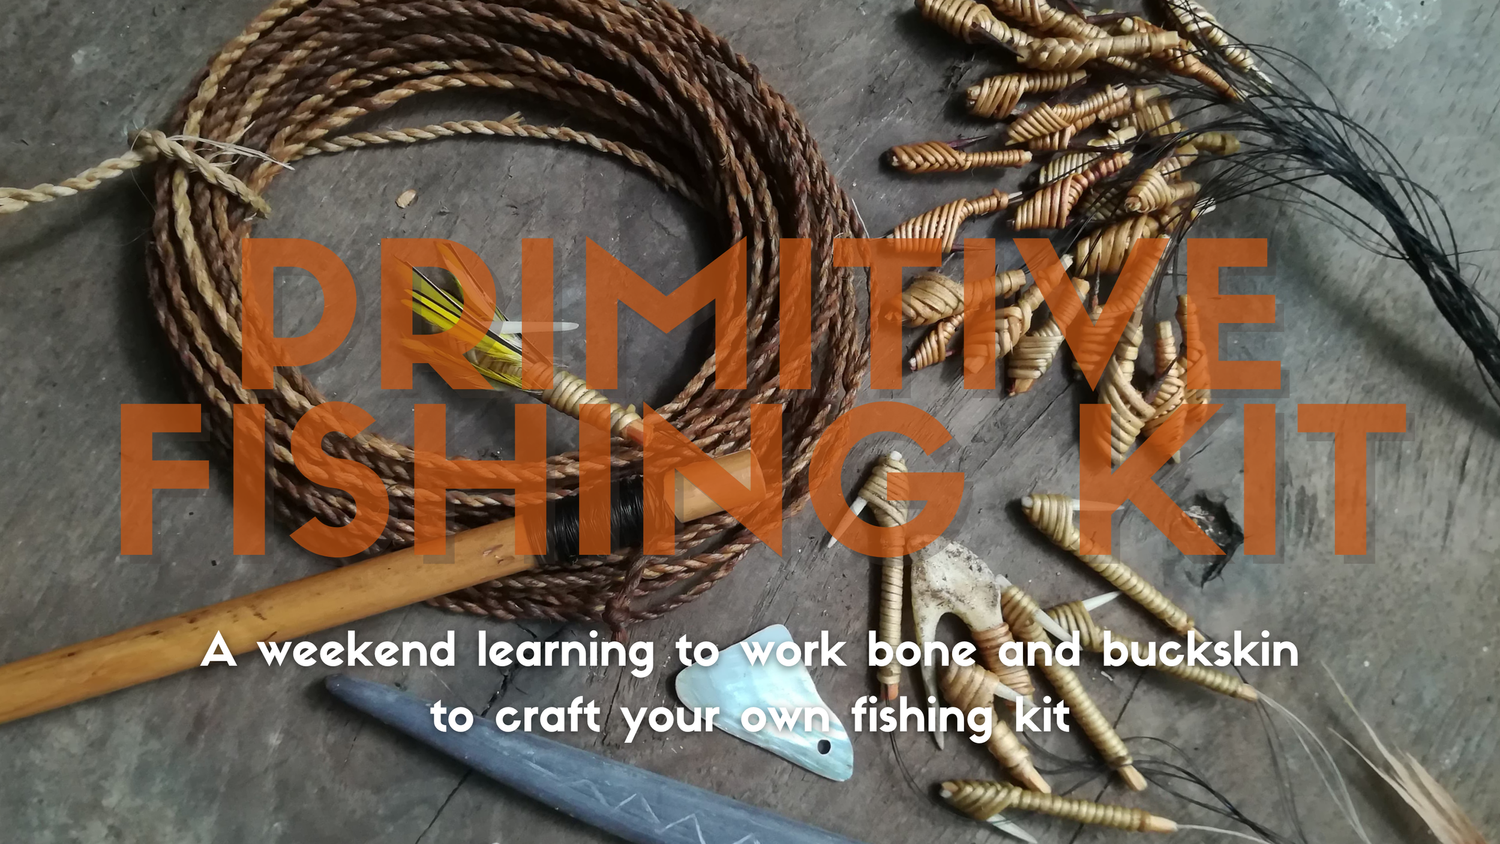 Primitive Fishing Kit Course - A weekend learning ancient crafts